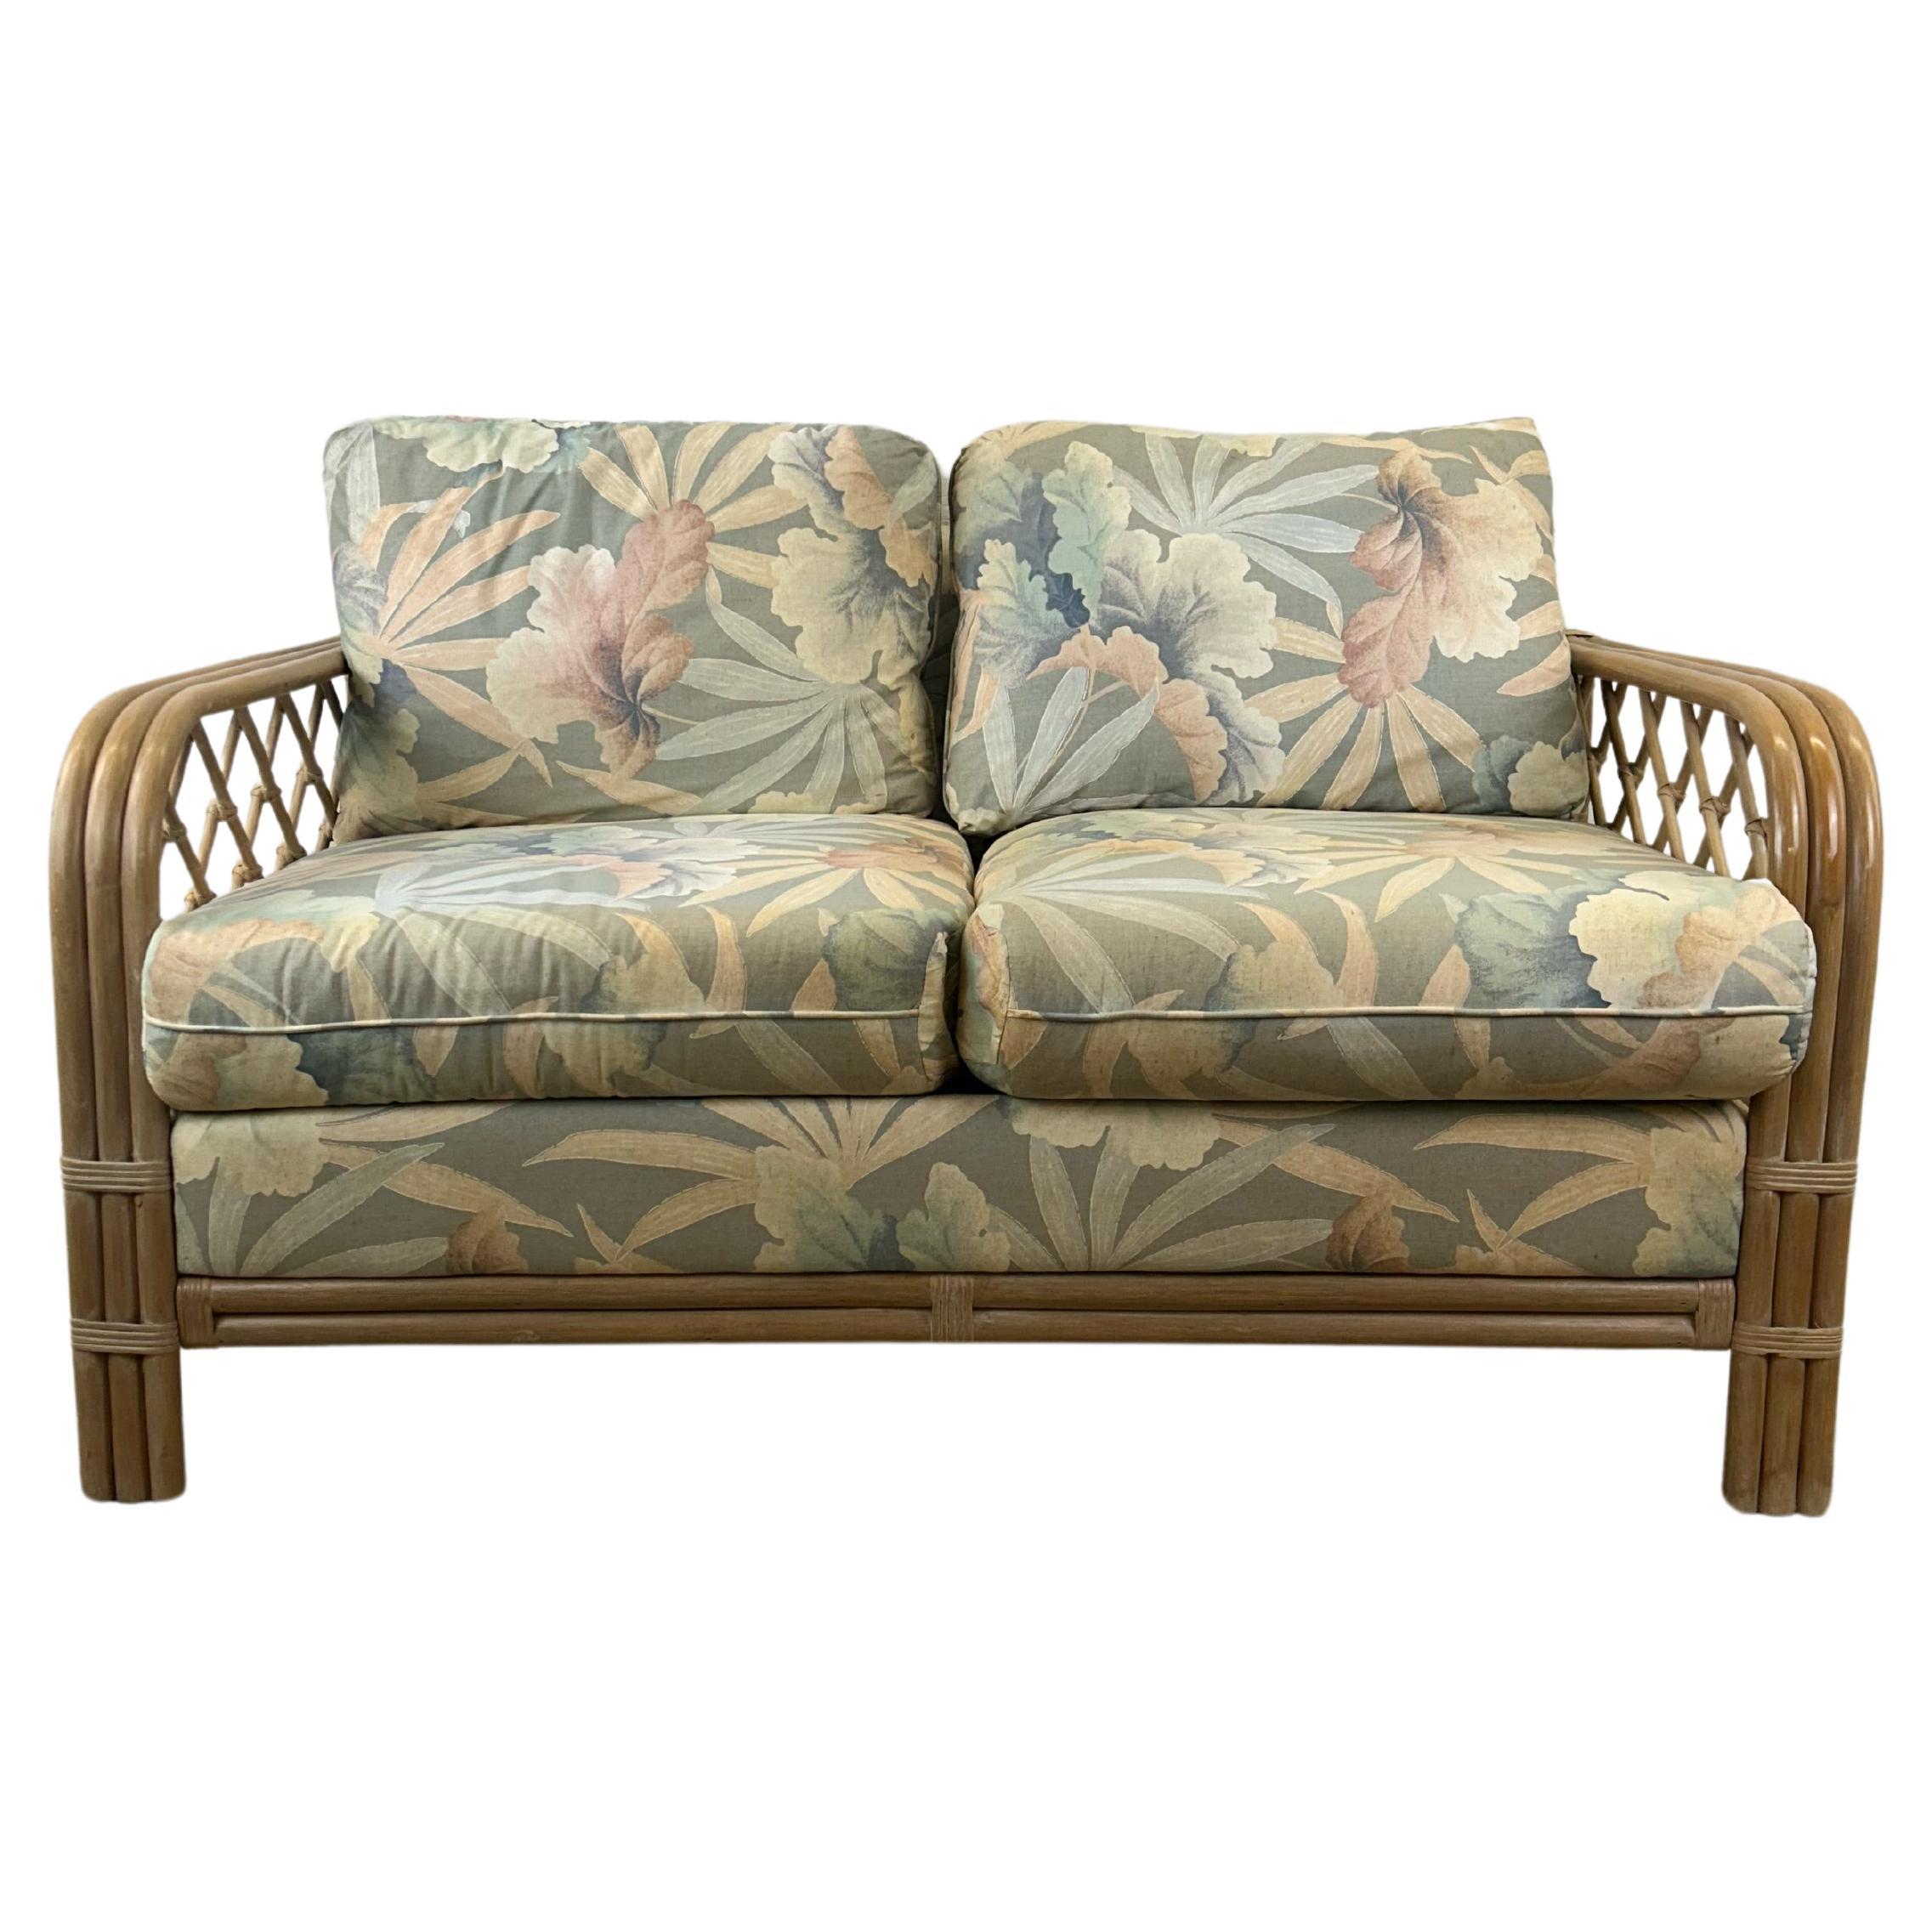 Vintage Boho Chic Rattan Loveseat with Floral Upholstery